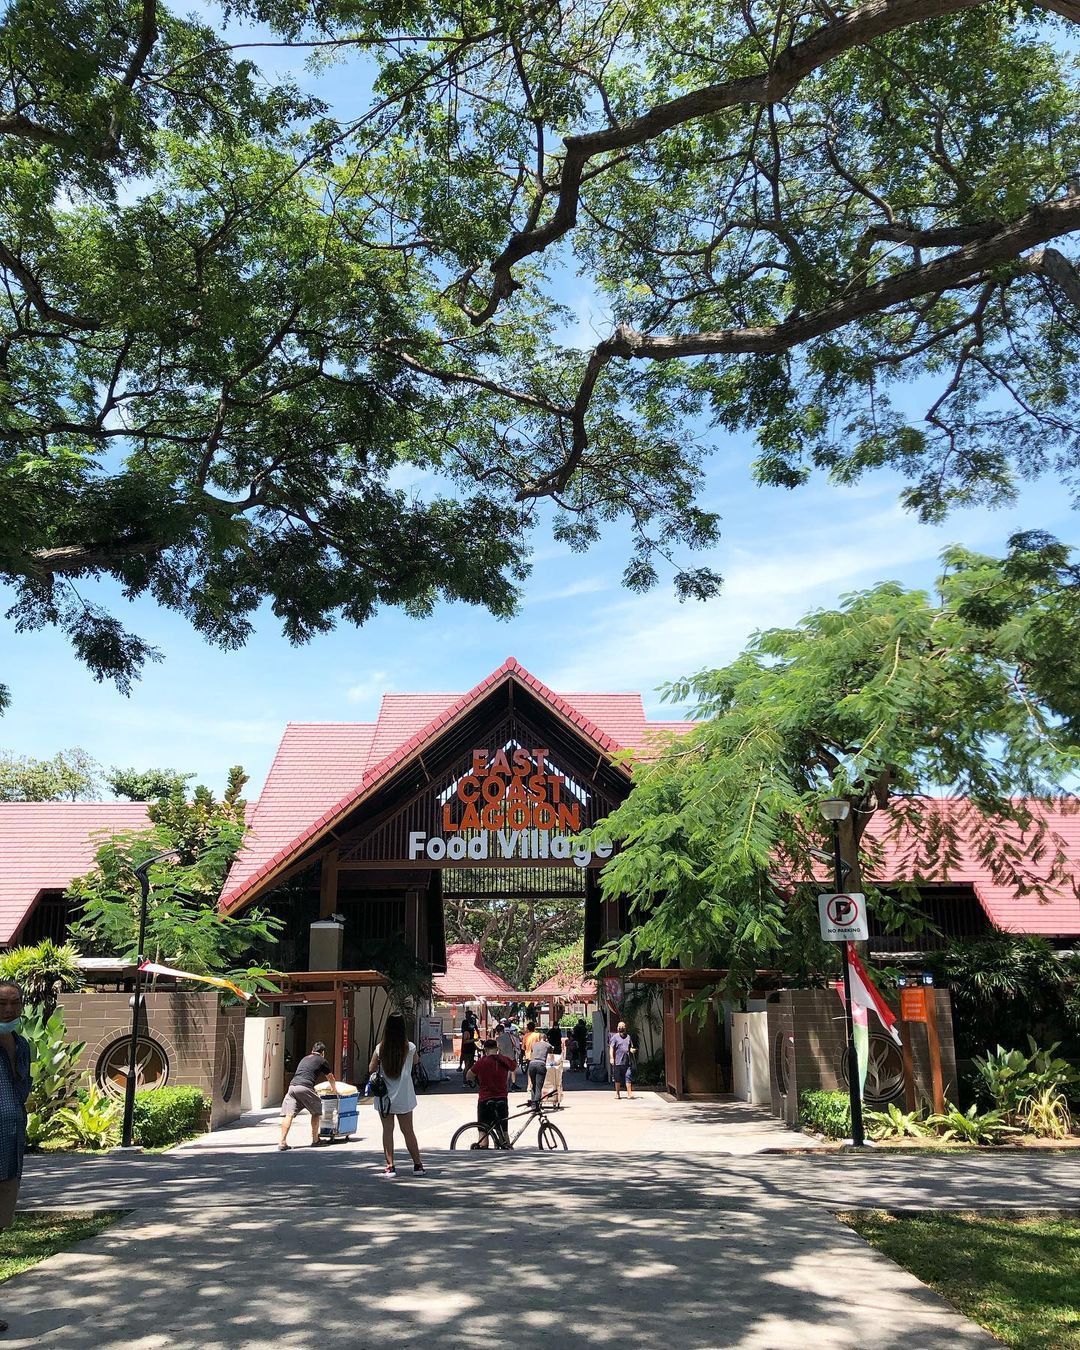 food courts in singapore - east coast lagoon food village entrance